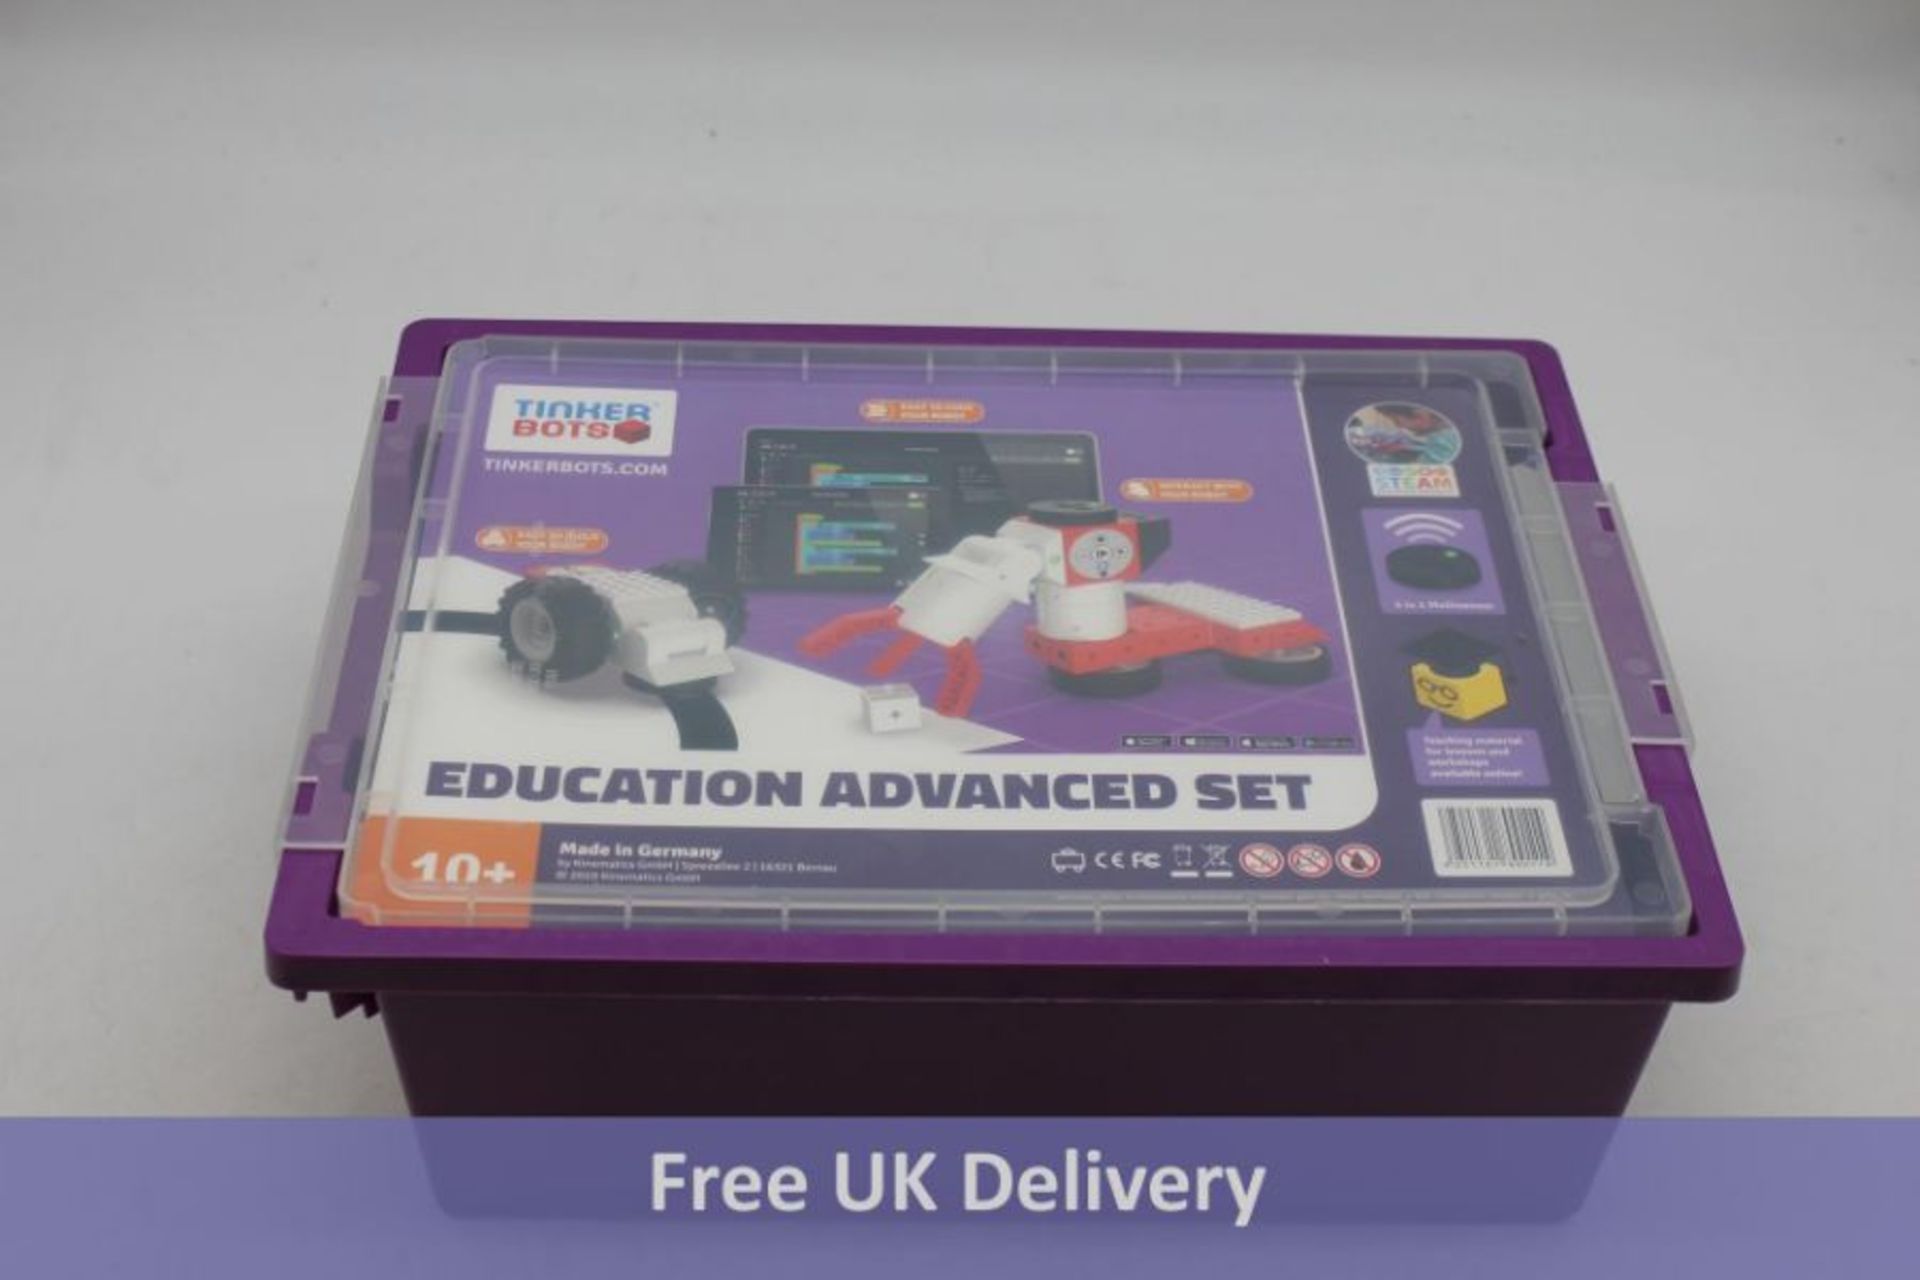 Tinker Bots Education Advanced Set in the Transport Tray. Box opened